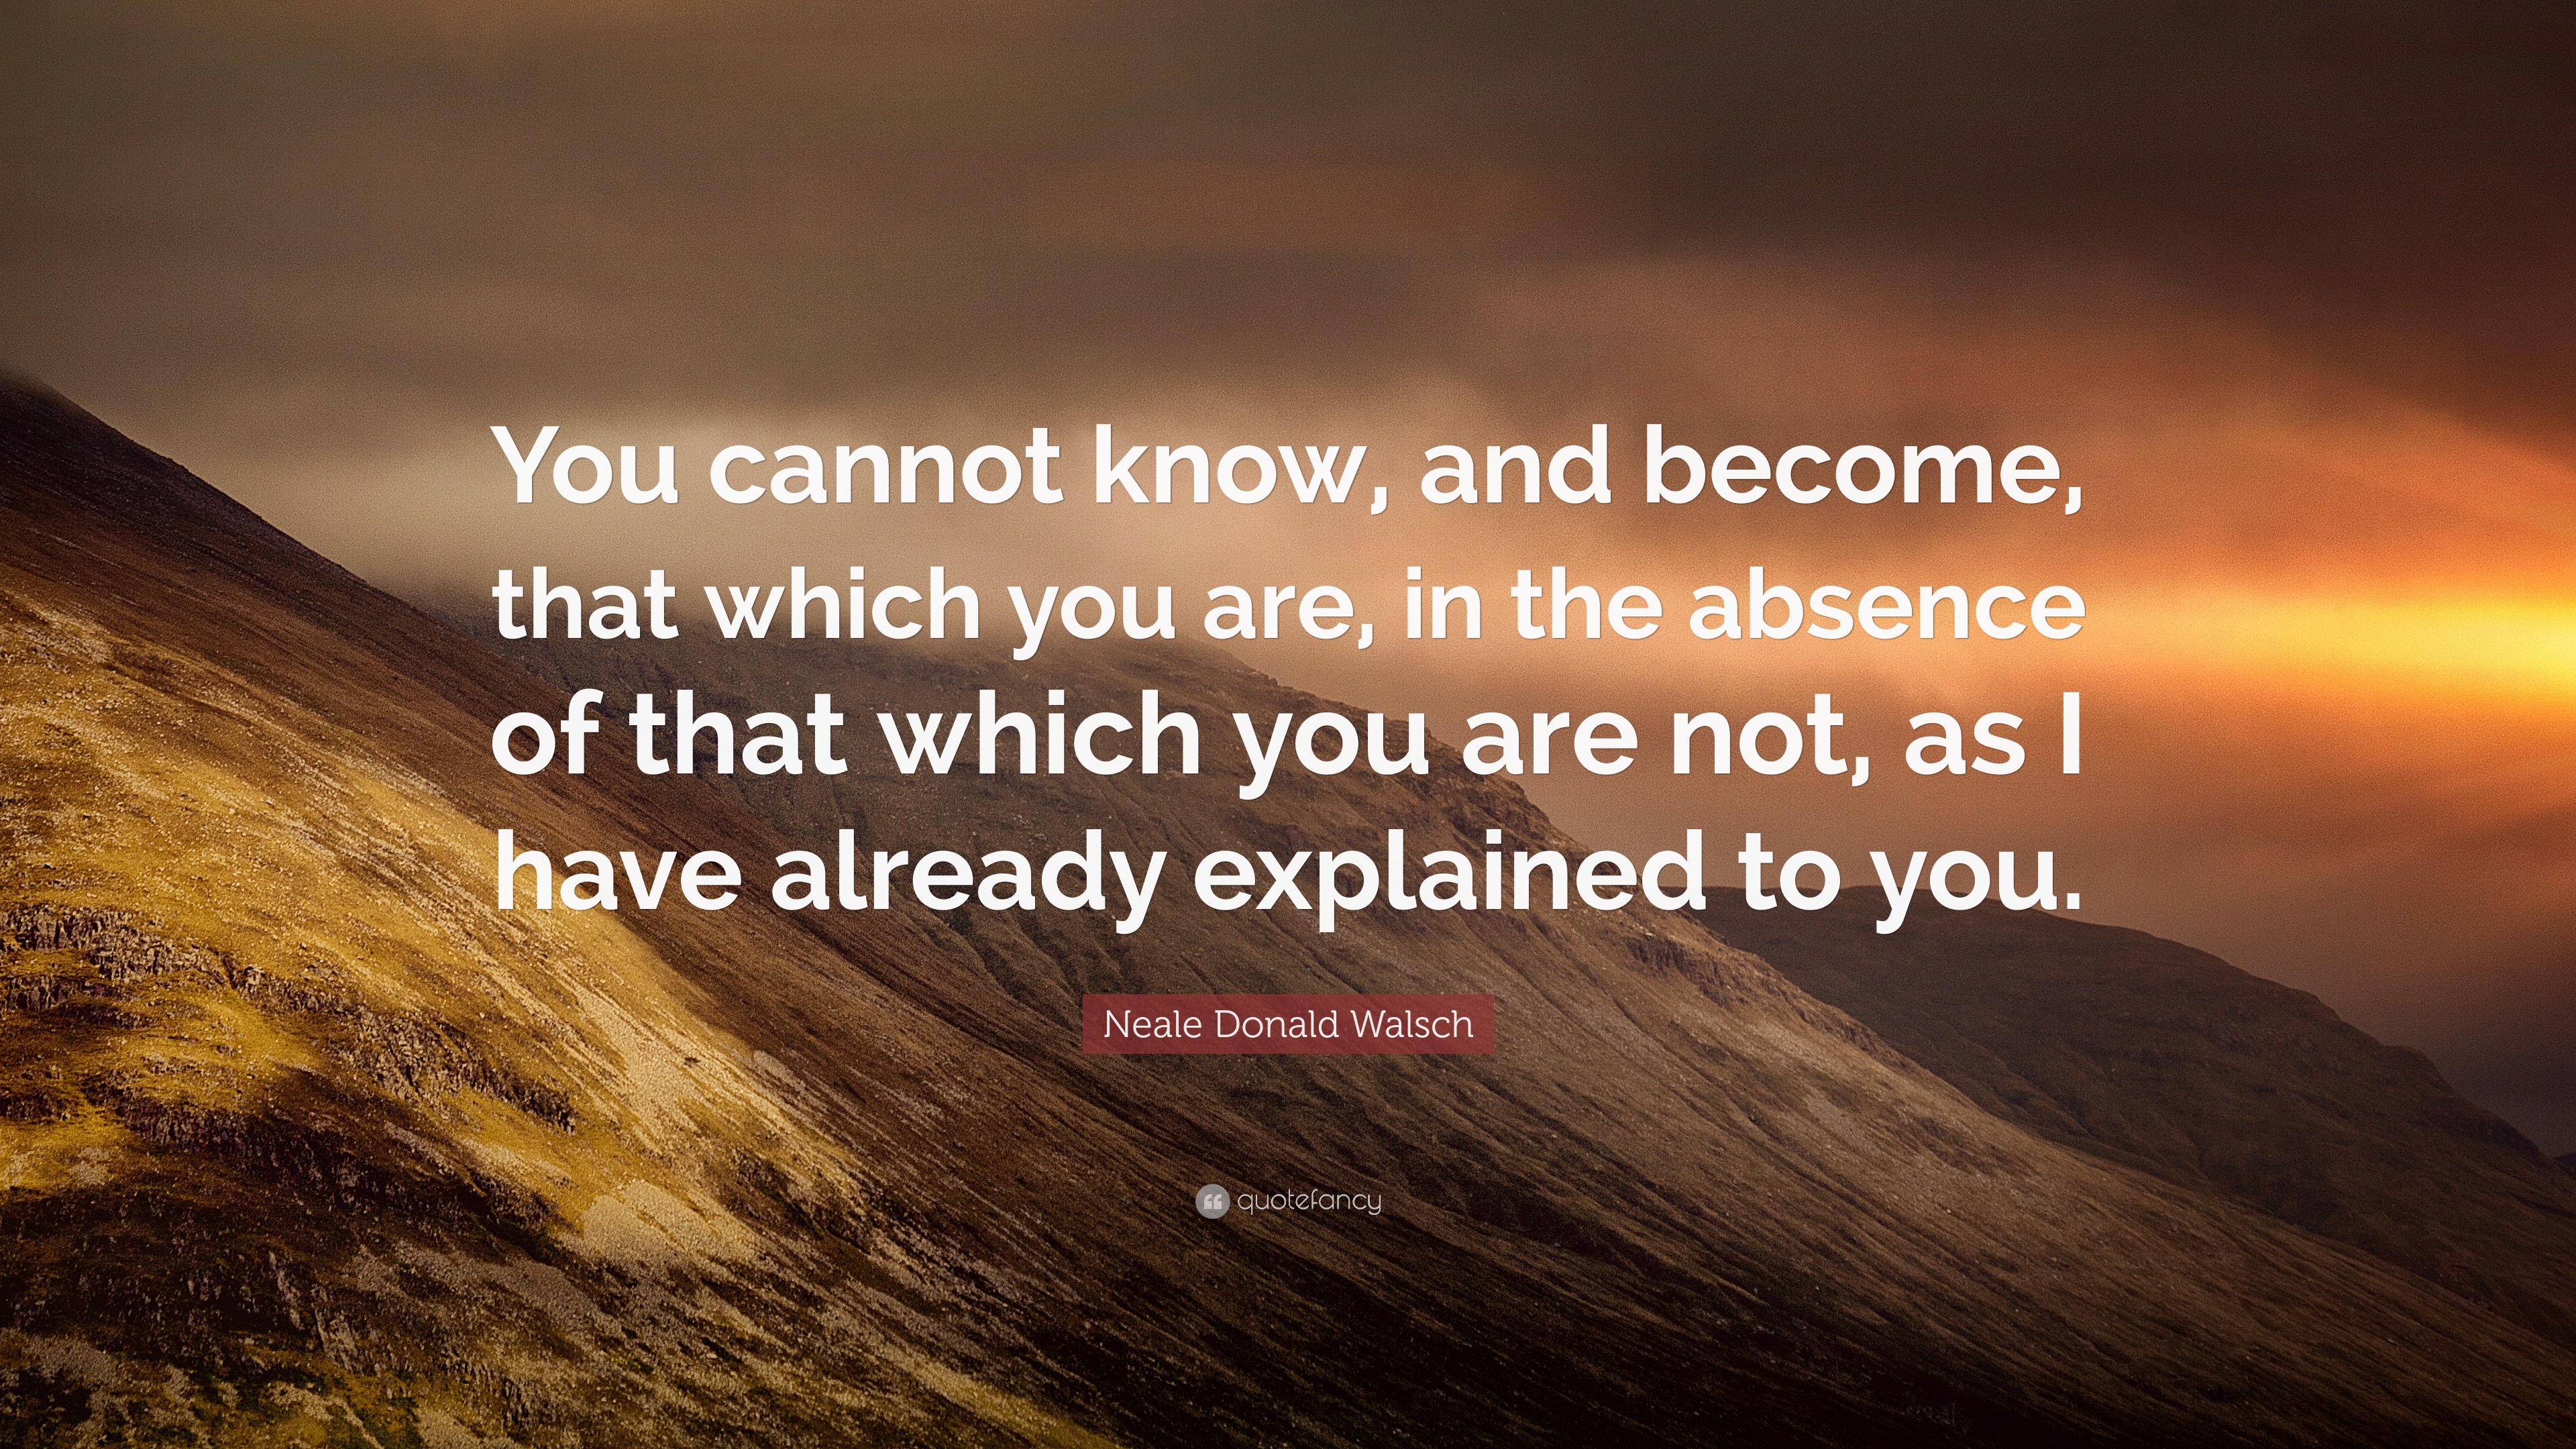 Neale Donald Walsch Quote You Cannot Know And Become That Which You Are In The Absence Of That Which You Are Not As I Have Already Explained T